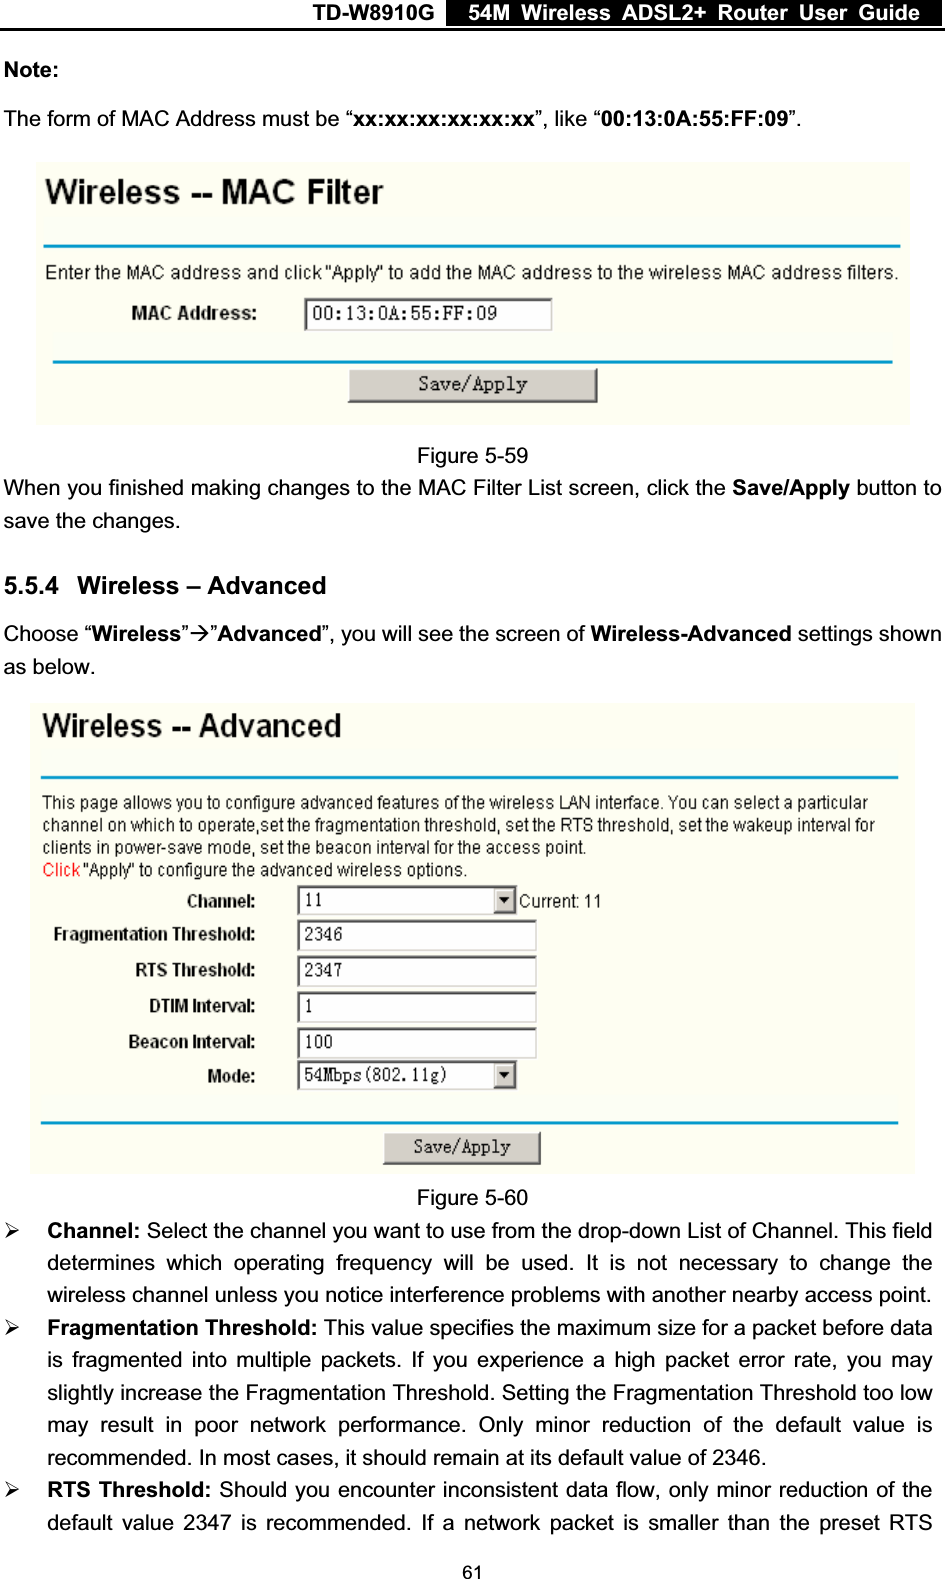 TD-W8910G    54M Wireless ADSL2+ Router User Guide  Note:The form of MAC Address must be “xx:xx:xx:xx:xx:xx”, like “00:13:0A:55:FF:09”.Figure 5-59 When you finished making changes to the MAC Filter List screen, click the Save/Apply button to save the changes. 5.5.4 Wireless – Advanced Choose “Wireless”Æ”Advanced”, you will see the screen of Wireless-Advanced settings shown as below. Figure 5-60 ¾Channel: Select the channel you want to use from the drop-down List of Channel. This field determines which operating frequency will be used. It is not necessary to change the wireless channel unless you notice interference problems with another nearby access point. ¾Fragmentation Threshold: This value specifies the maximum size for a packet before data is fragmented into multiple packets. If you experience a high packet error rate, you may slightly increase the Fragmentation Threshold. Setting the Fragmentation Threshold too low may result in poor network performance. Only minor reduction of the default value is recommended. In most cases, it should remain at its default value of 2346. ¾RTS Threshold: Should you encounter inconsistent data flow, only minor reduction of the default value 2347 is recommended. If a network packet is smaller than the preset RTS  61